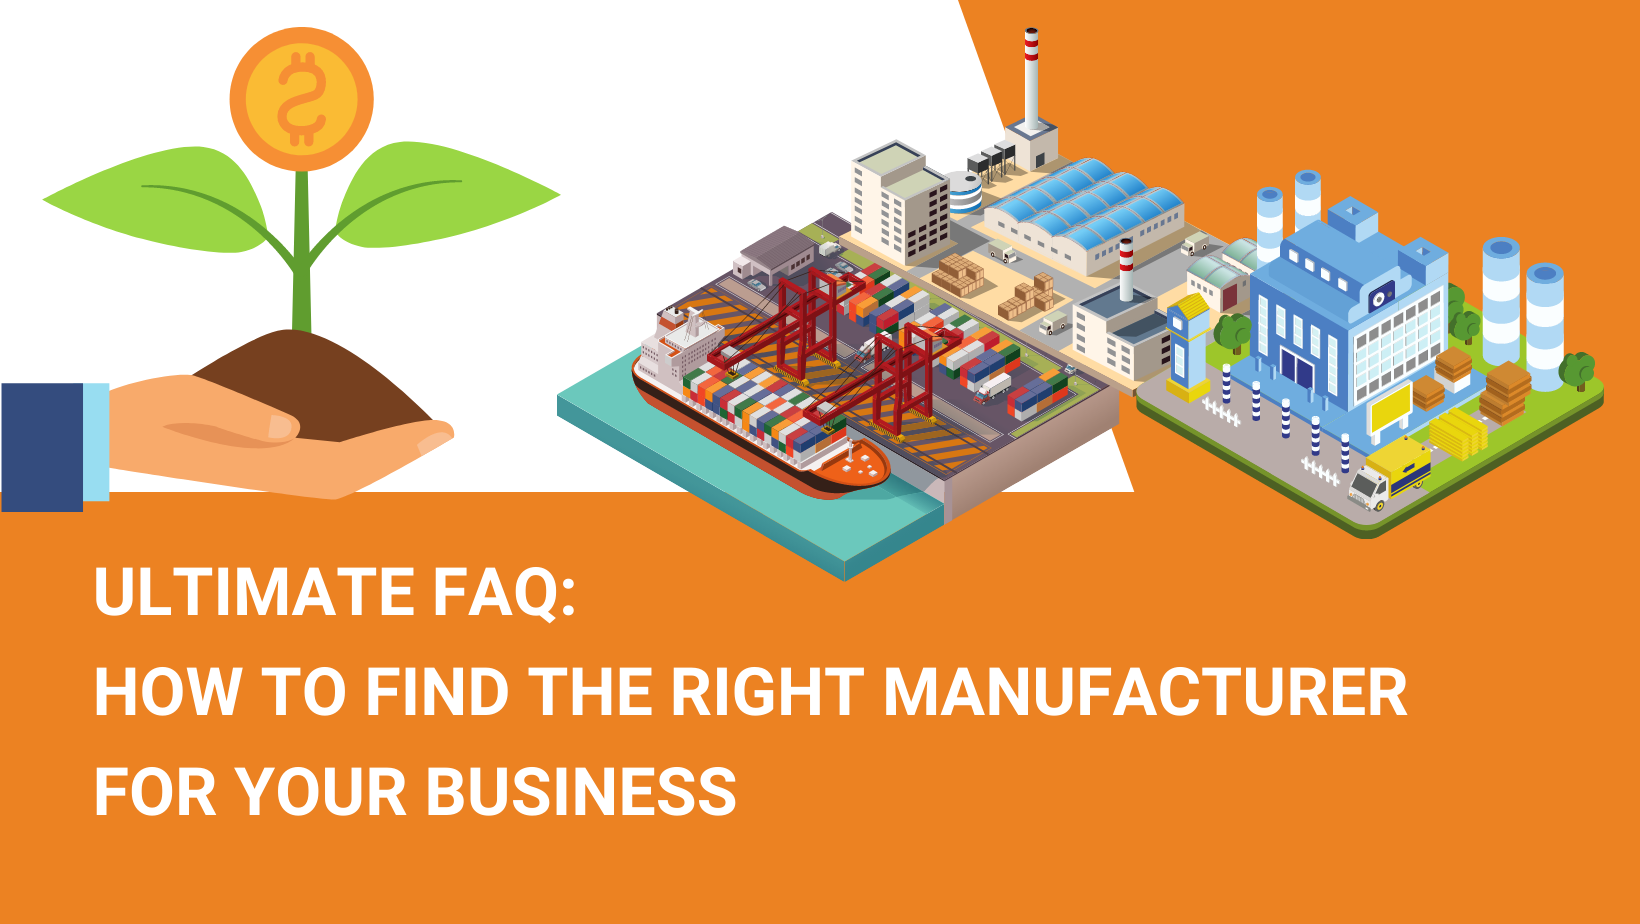 ULTIMATE FAQ HOW TO FIND THE RIGHT MANUFACTURER FOR YOUR BUSINESS